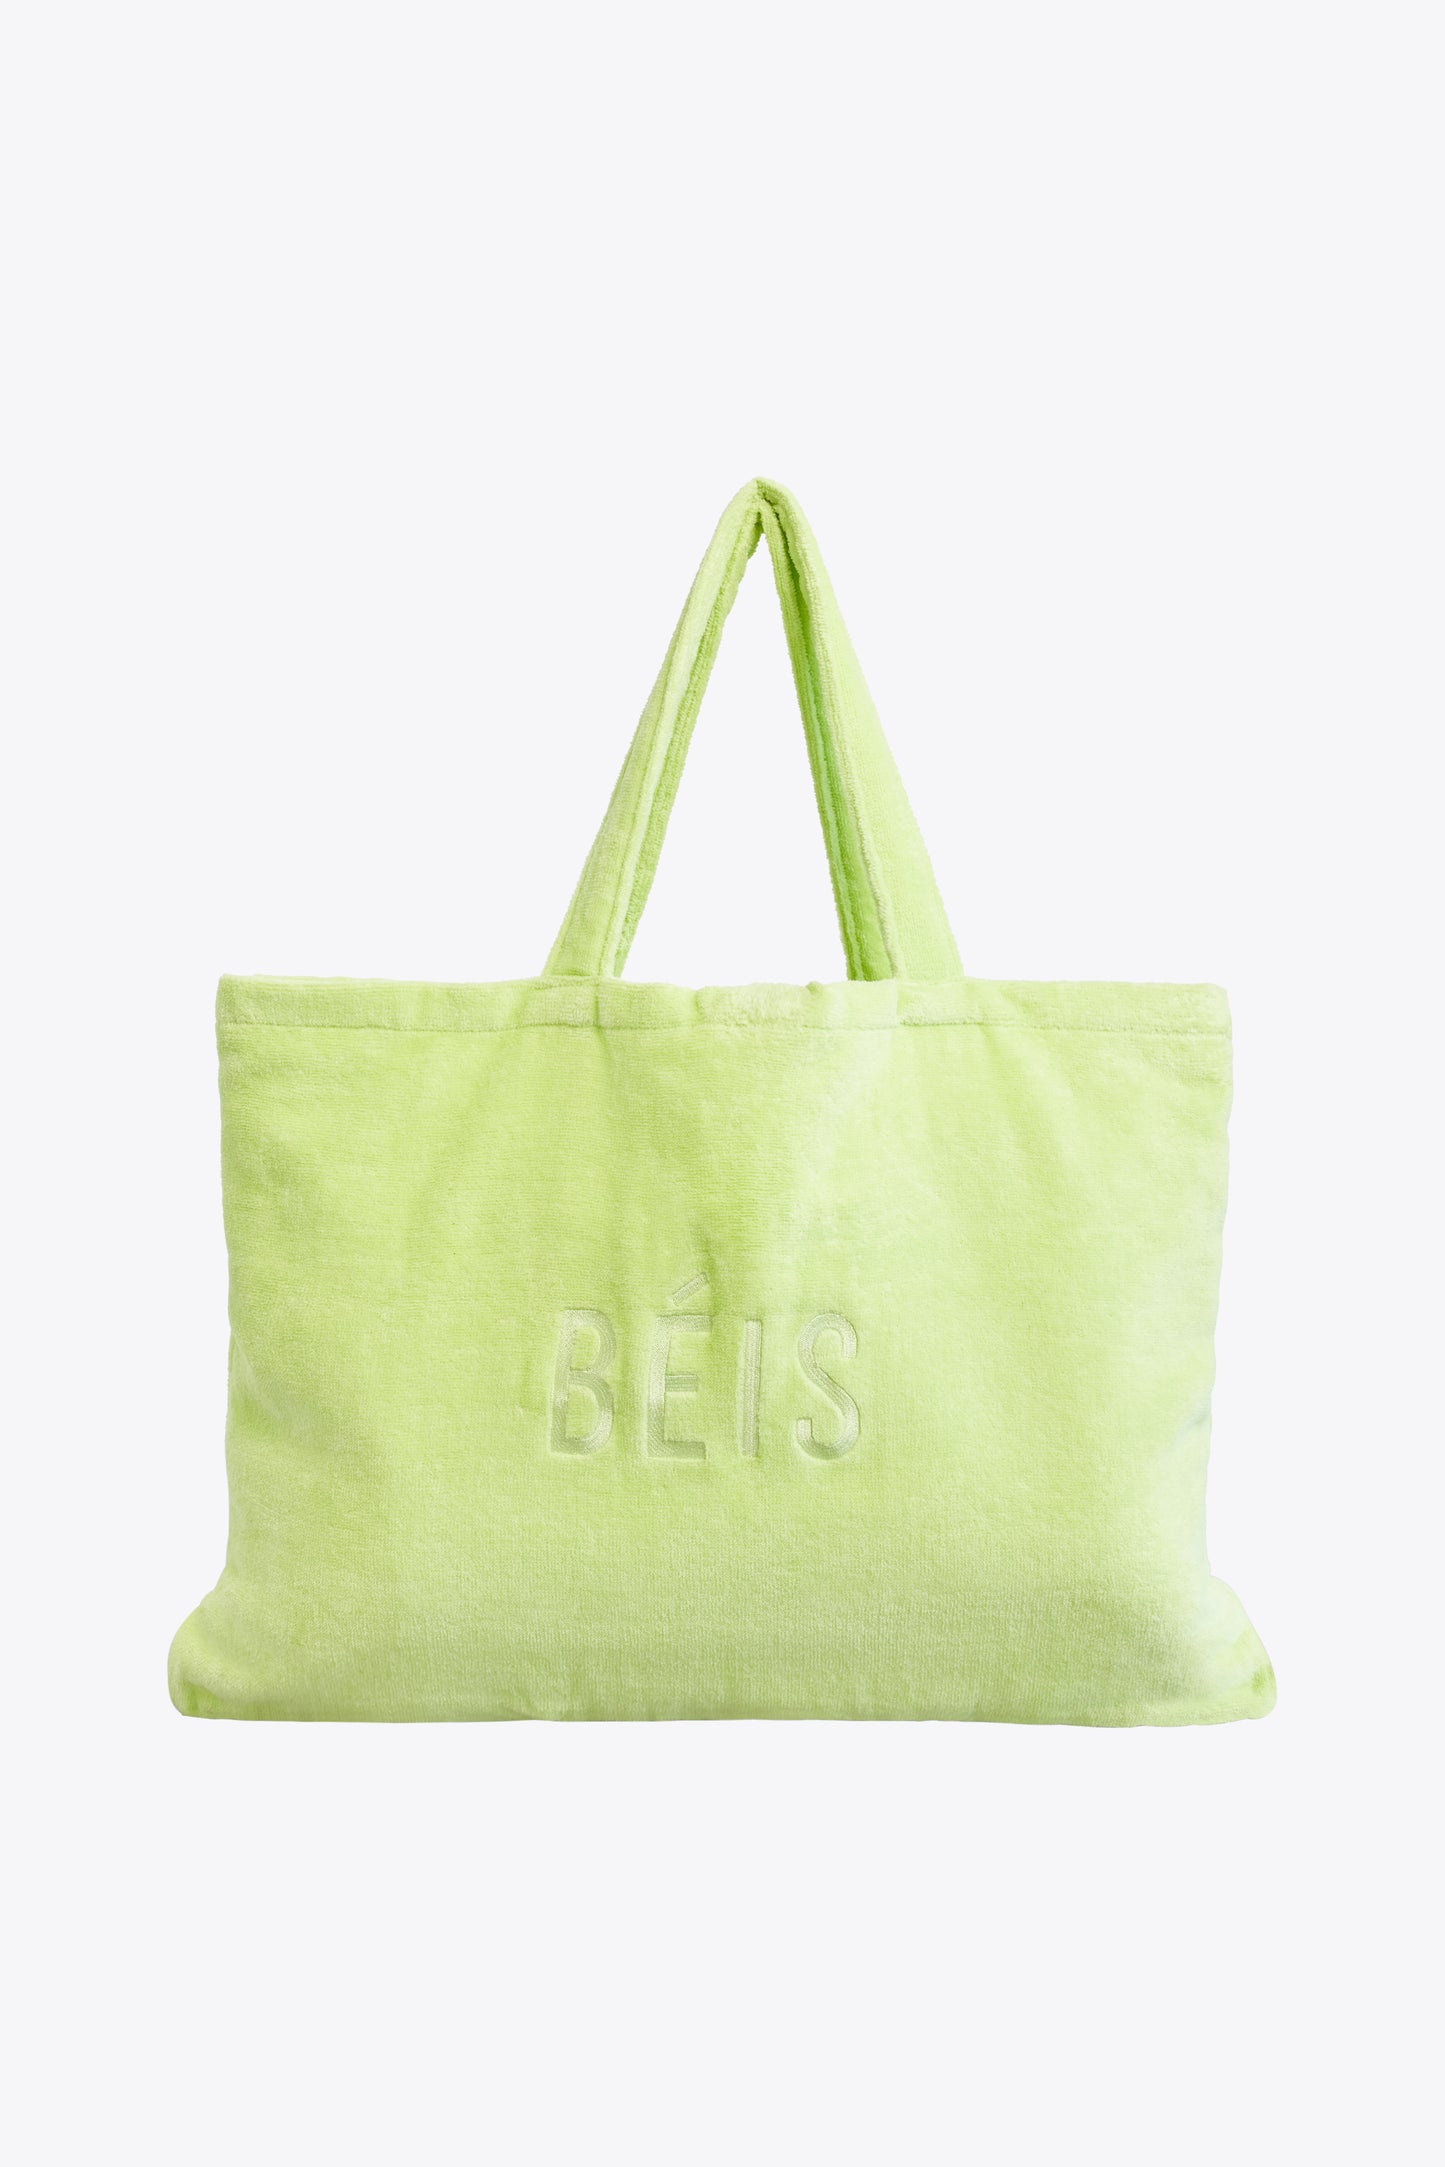 The Terry Towel Tote in Citron